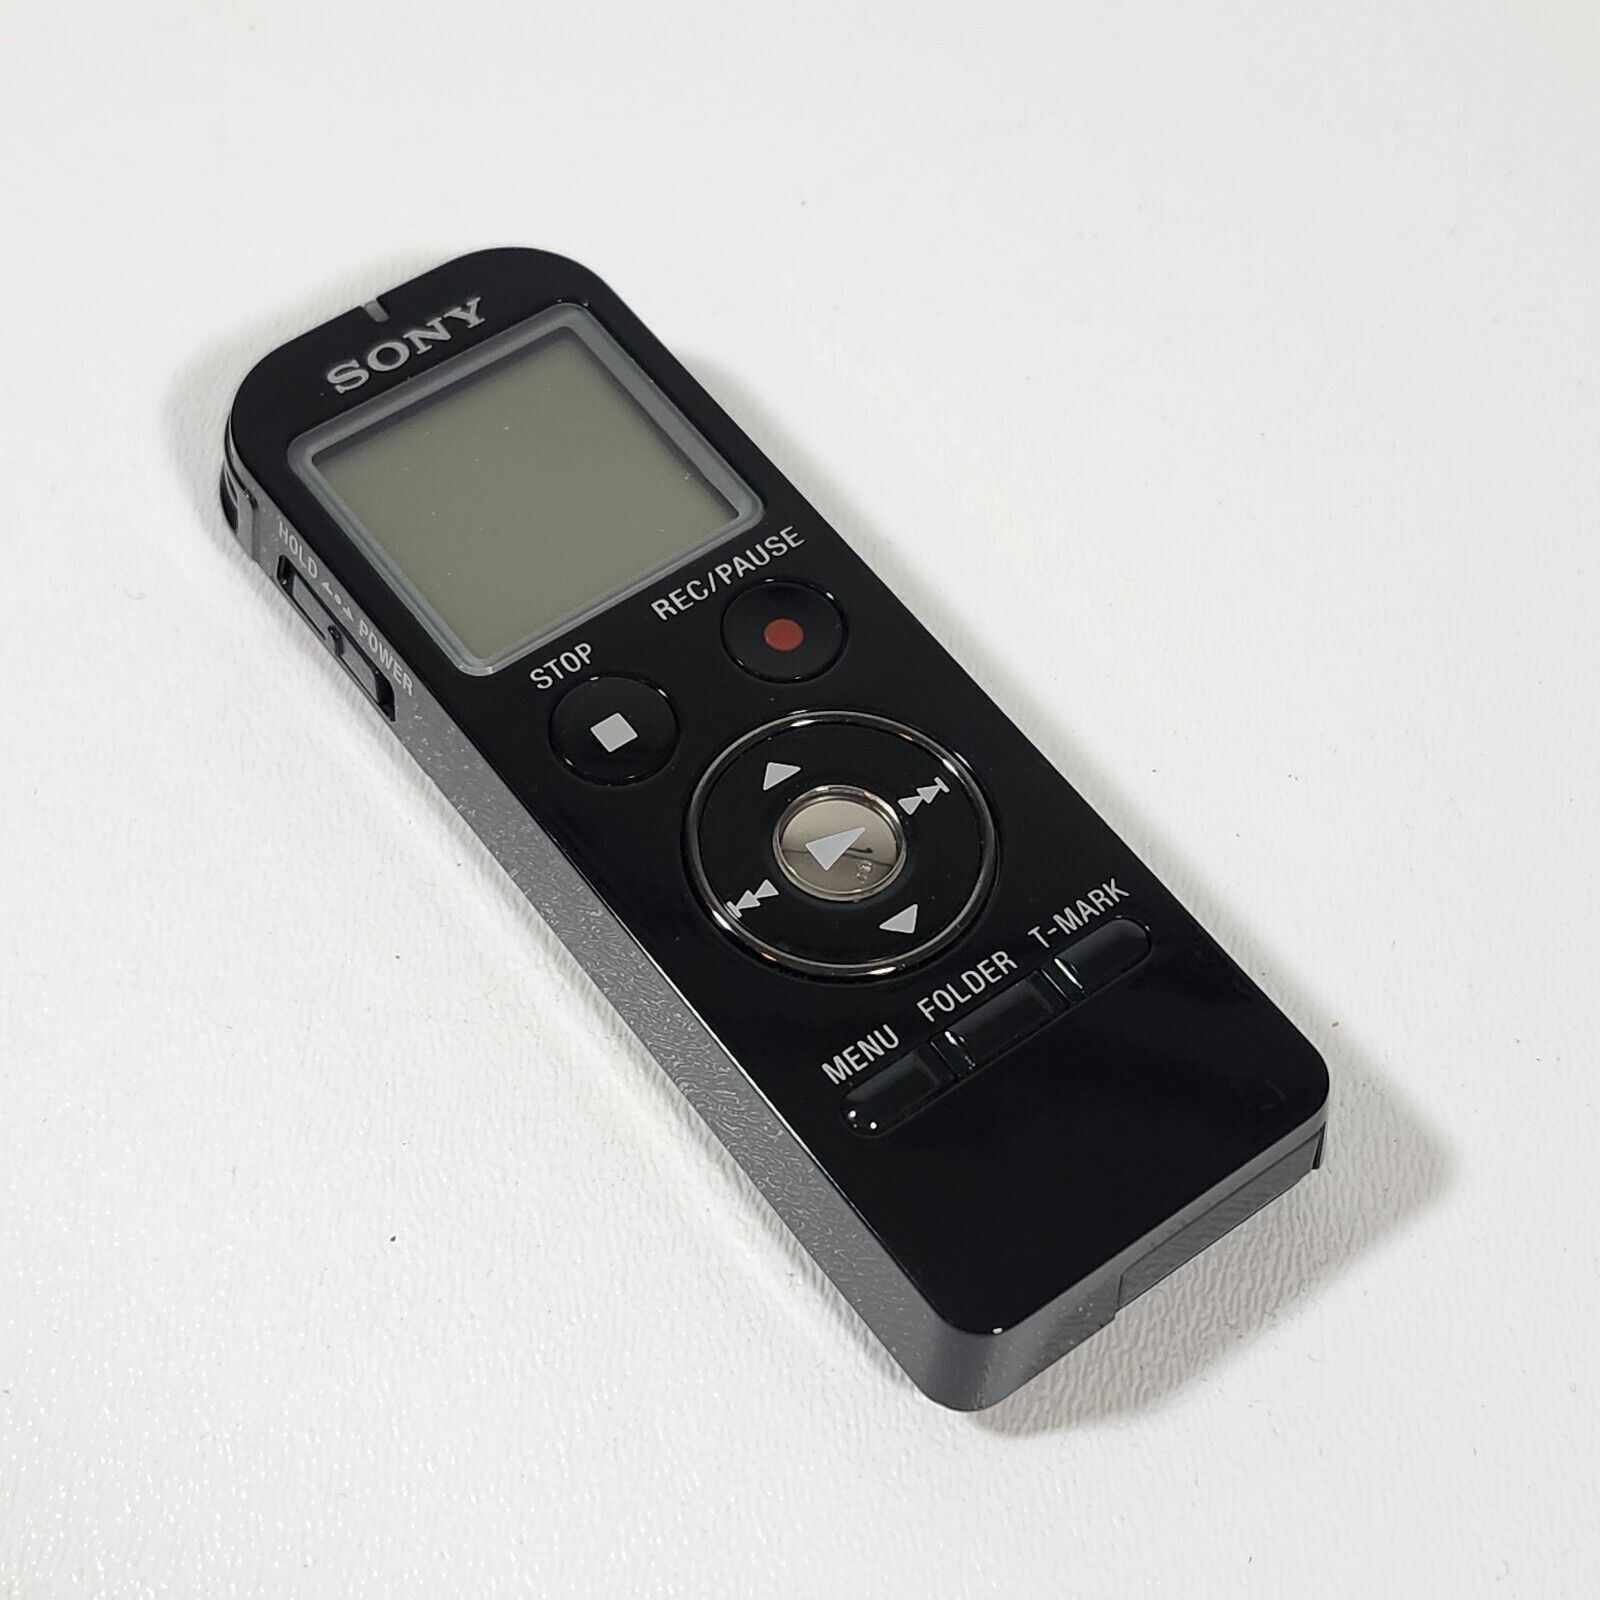 Sony ICD-UX533 Digital Voice Recorder Black IC Recorder Tested Works